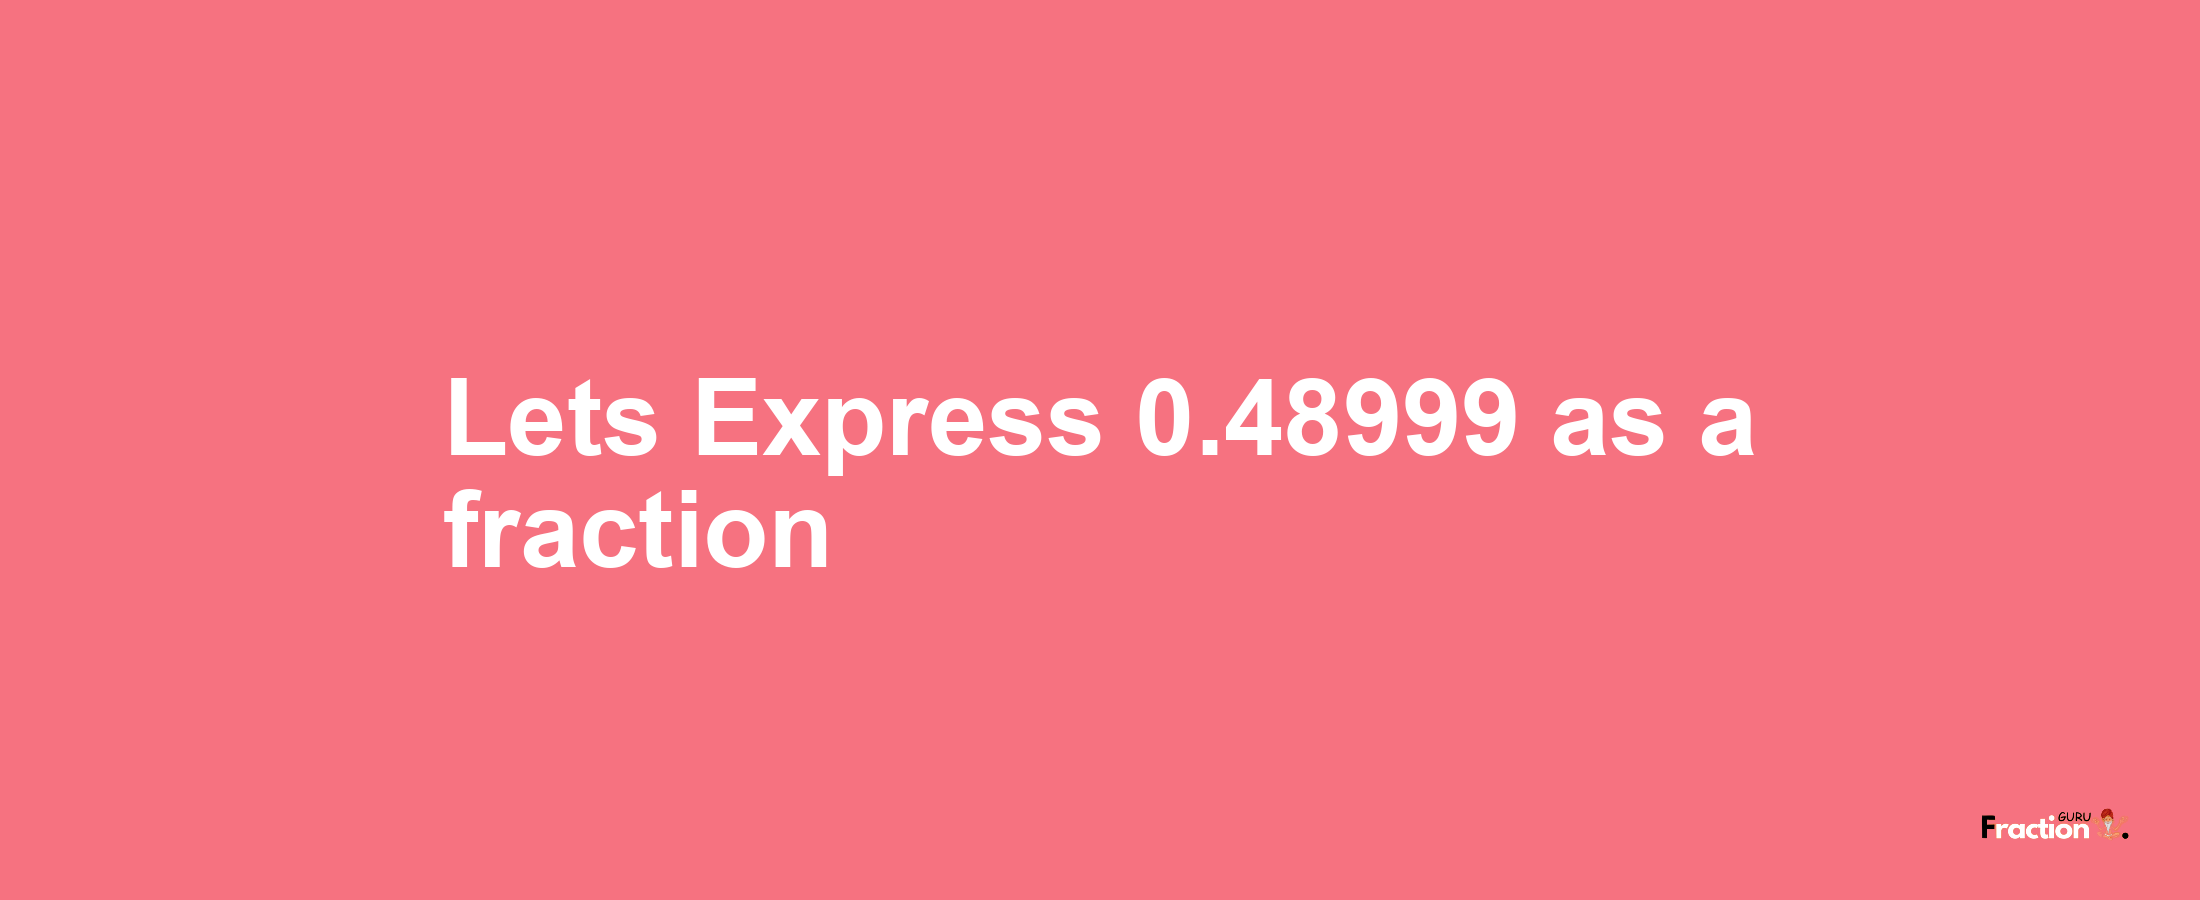 Lets Express 0.48999 as afraction